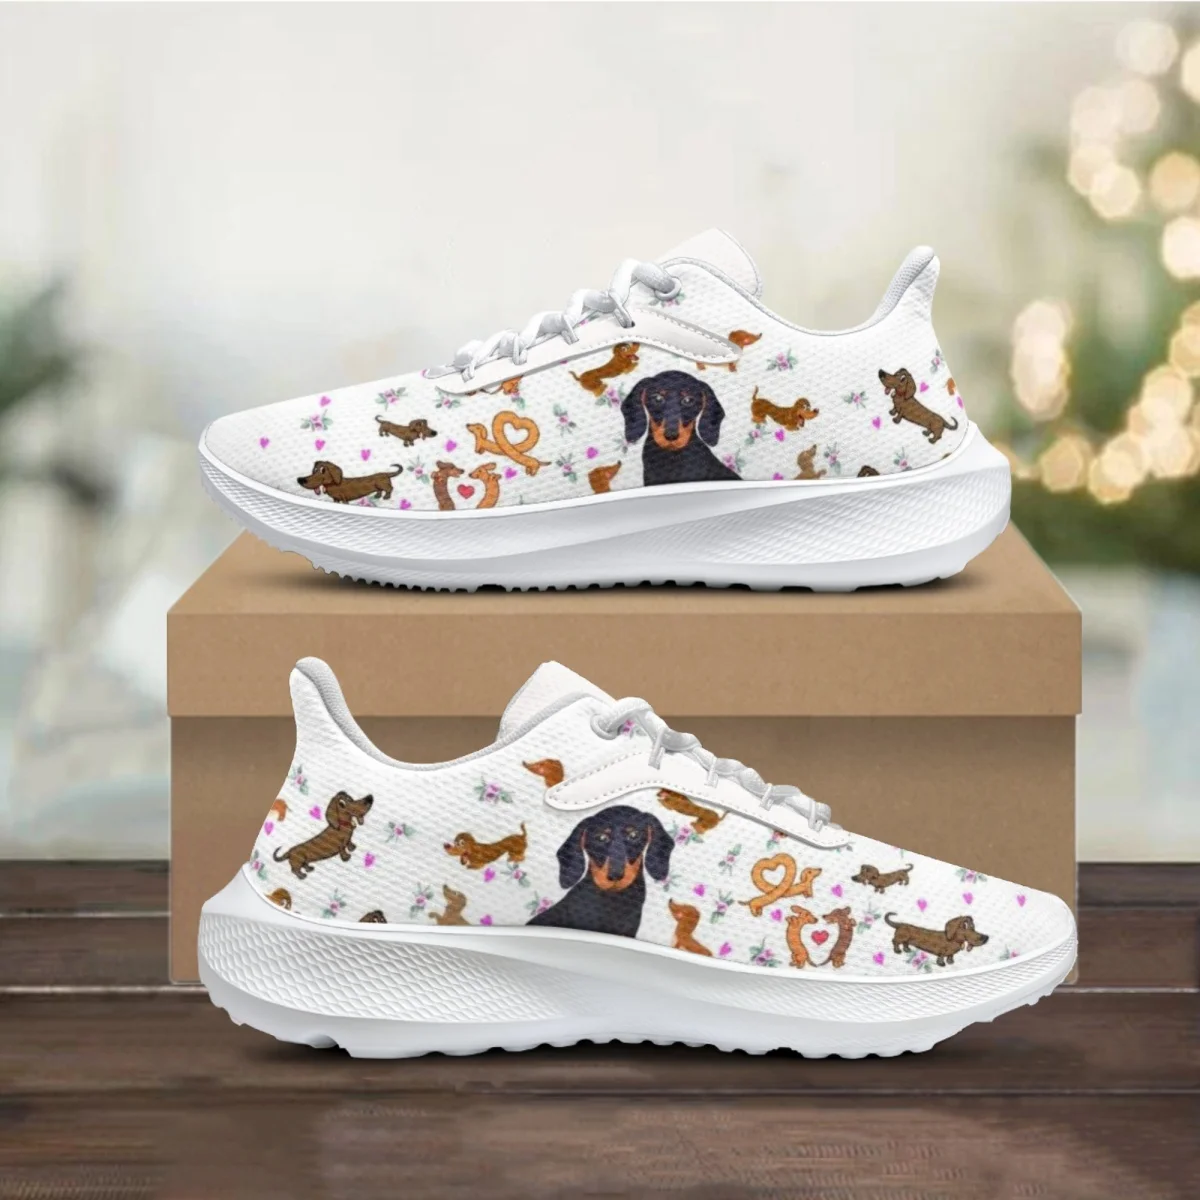 

Sneakers Female Cartoon Dachshund Designer Casual Comfortable Flat Shoes Lightweight Summer Autumn Fashion Trend Walking Shoes